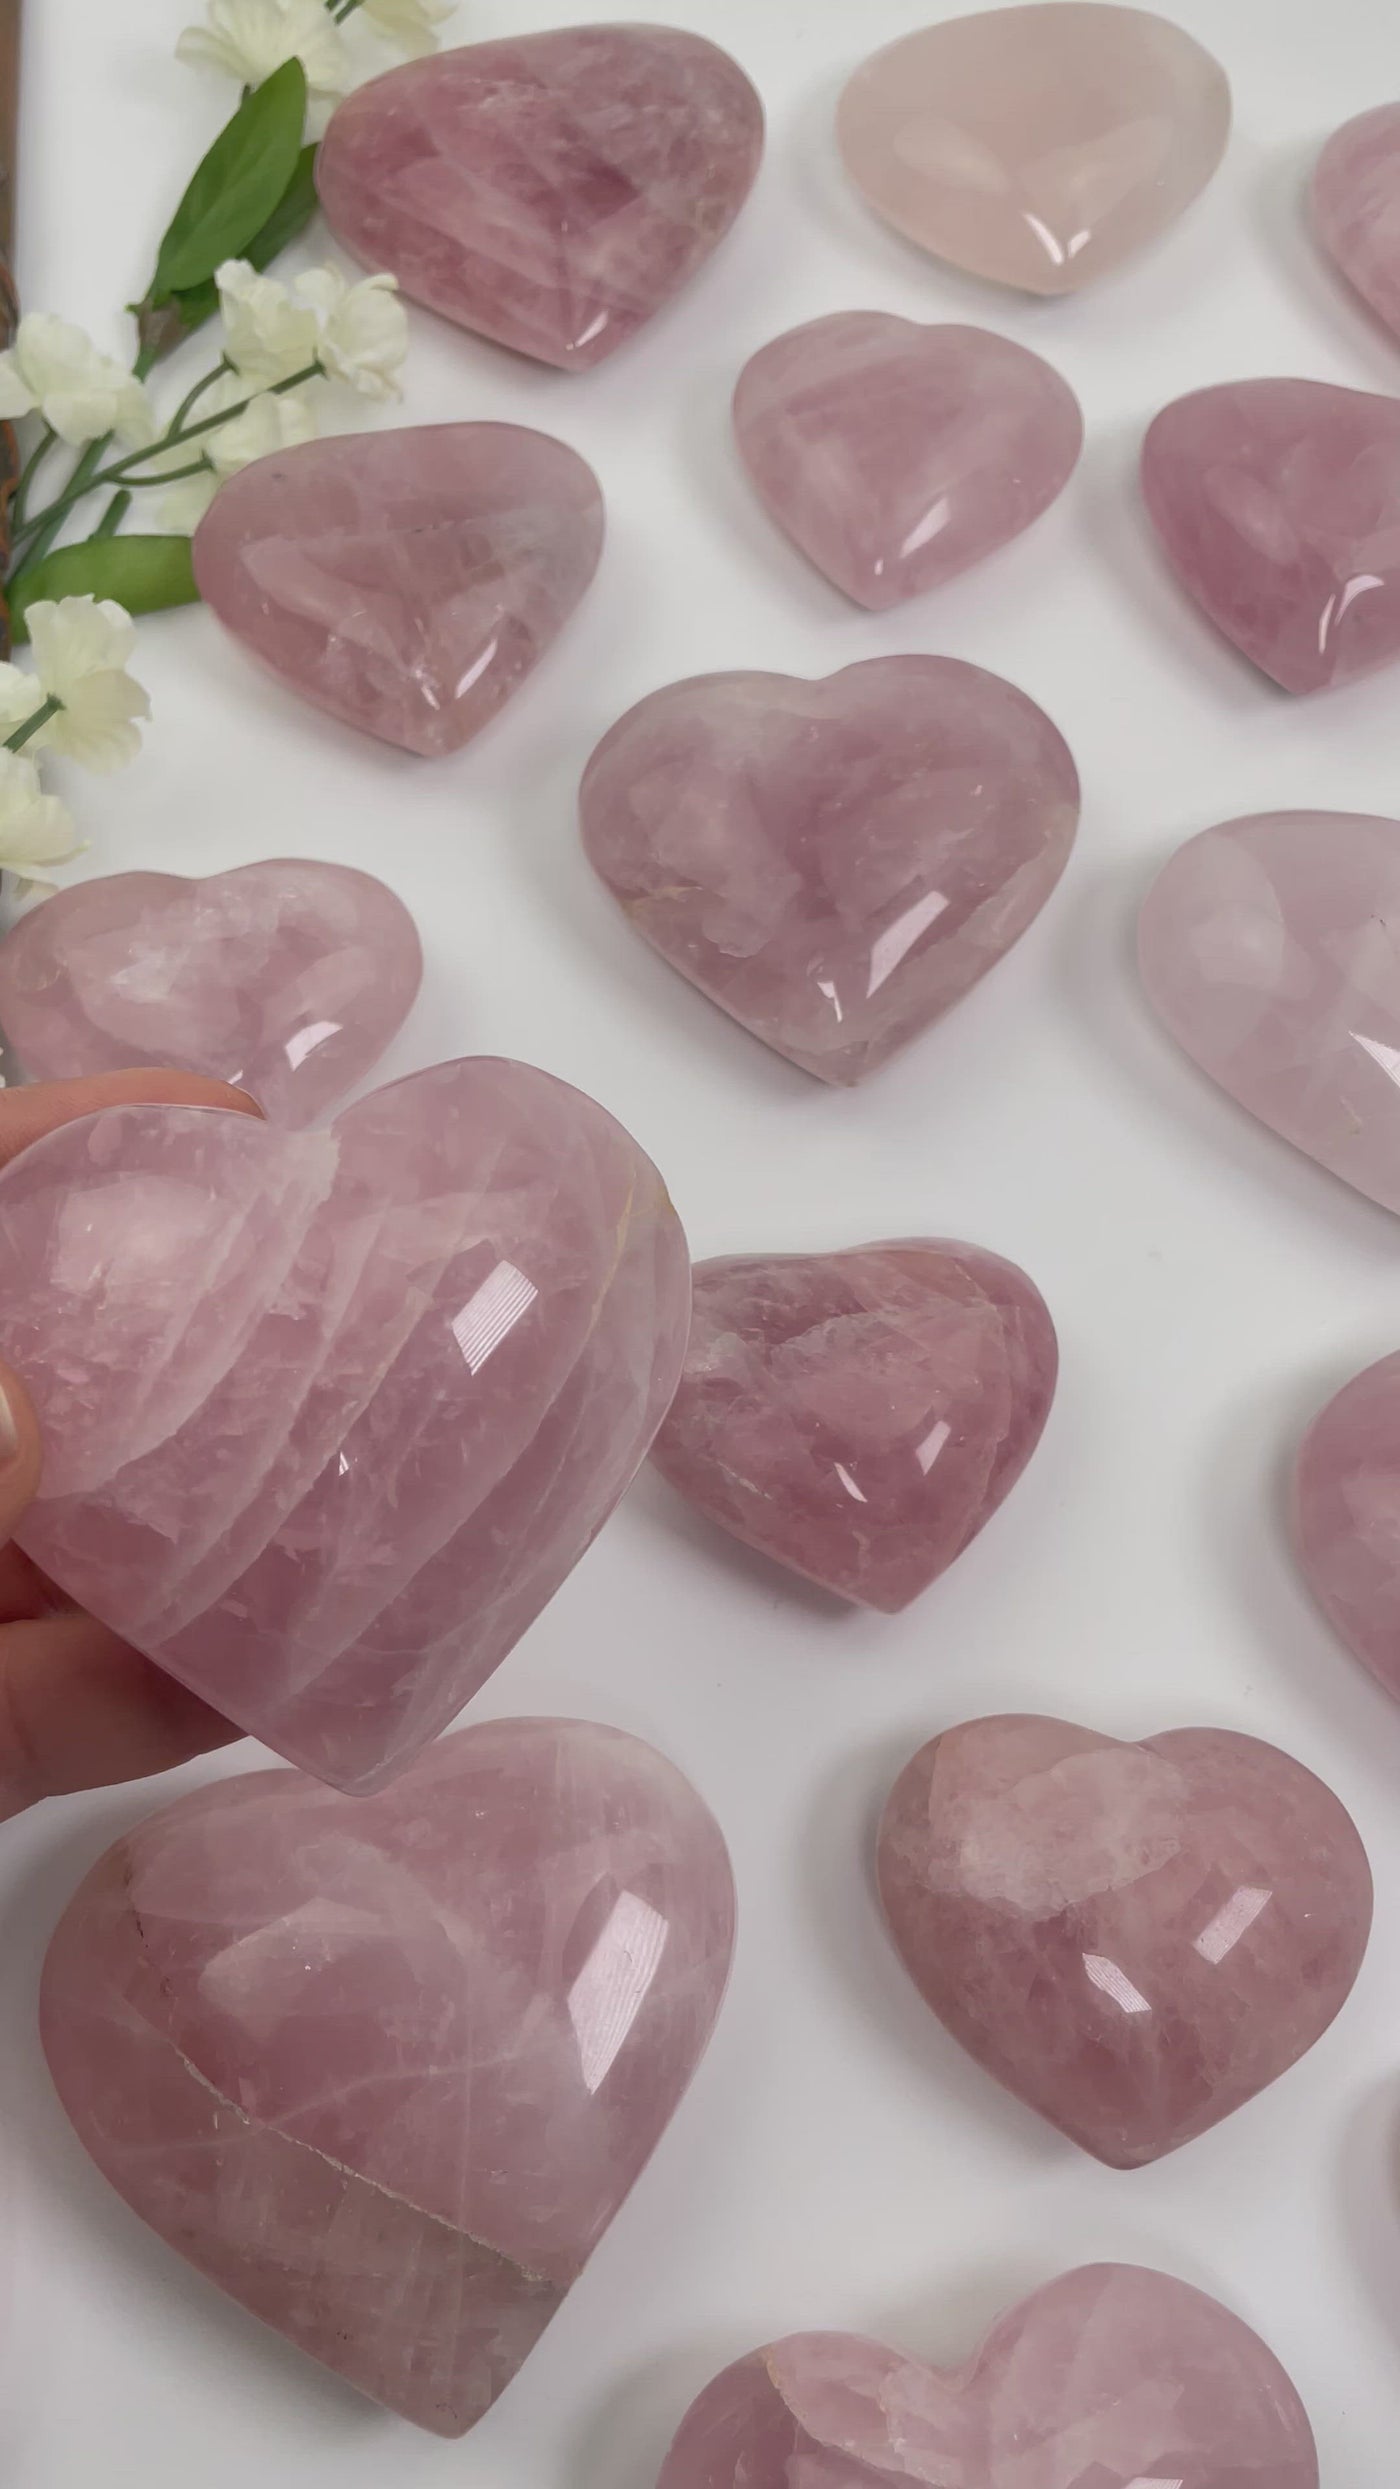 video of hearts laid out on a table showing sizes and shapes